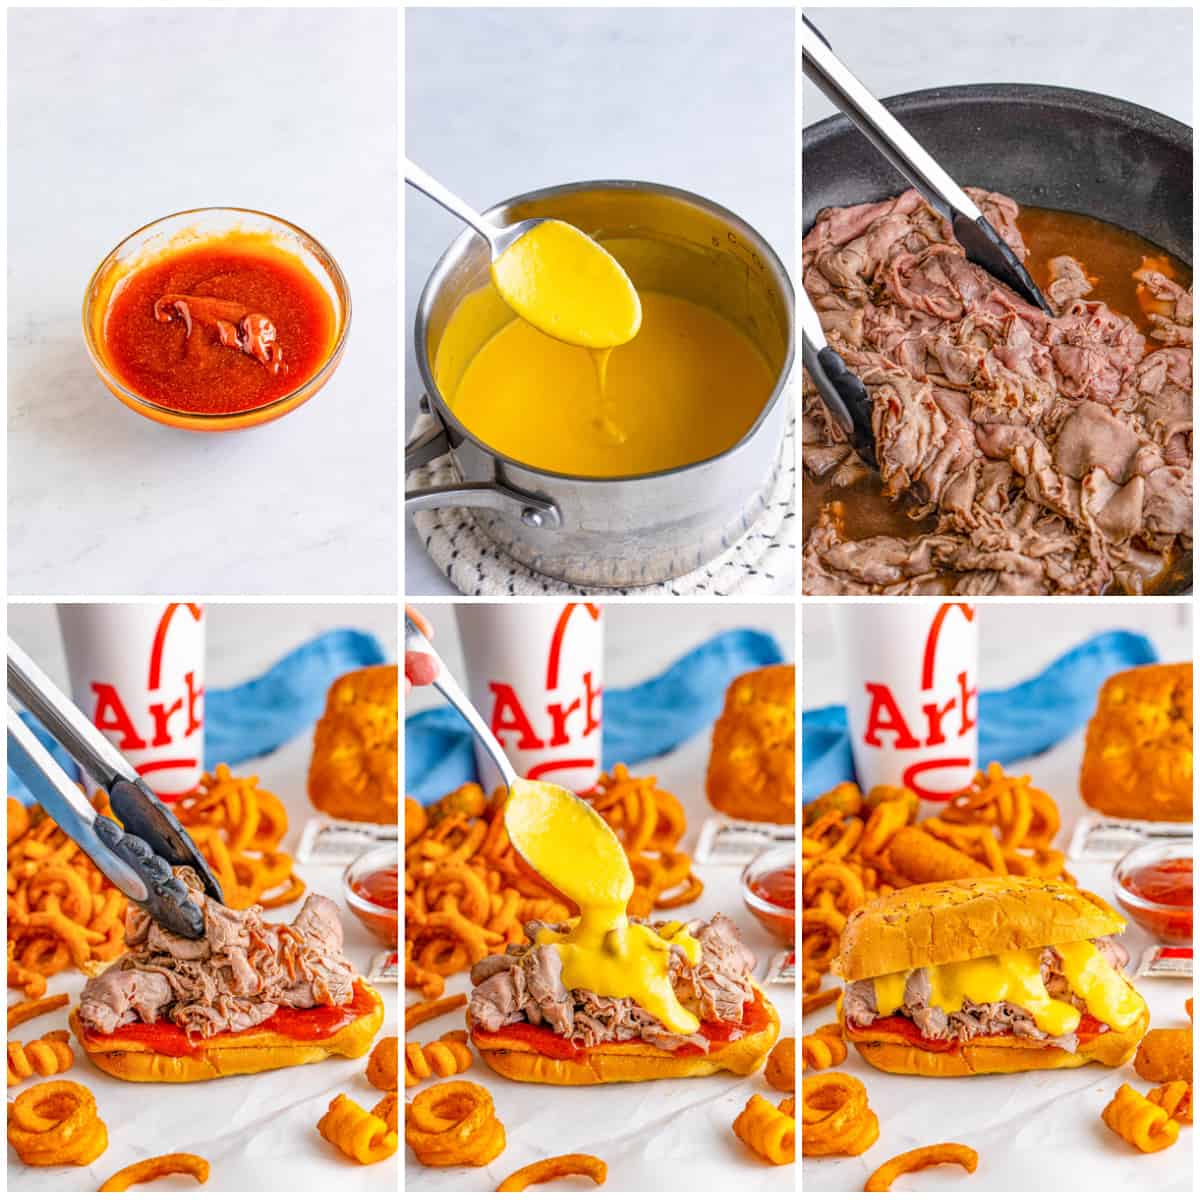 Step by step photos on how to make a Copycat Arby's Roast Beef and Cheddar.